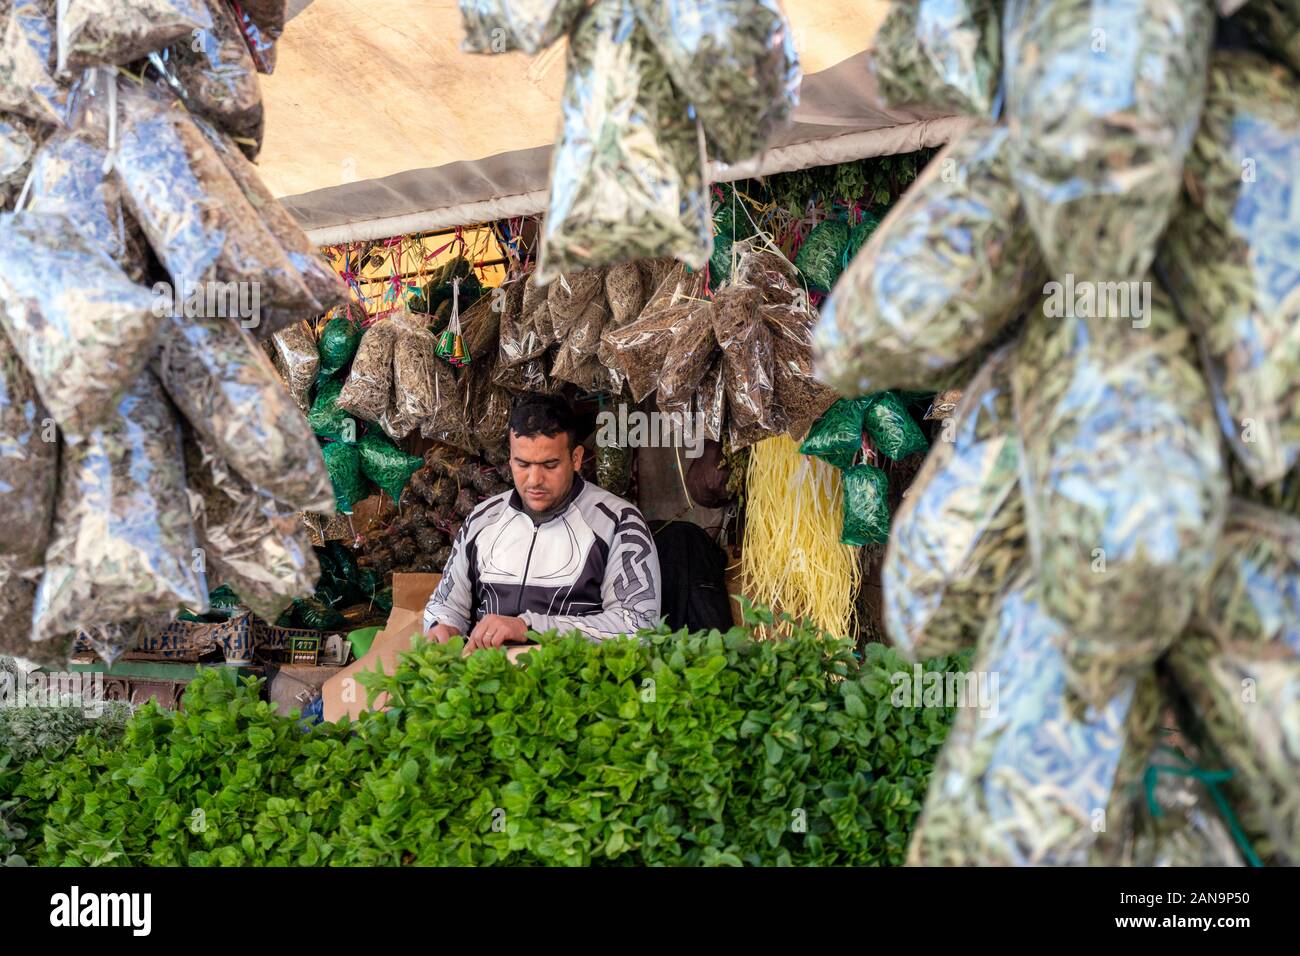 Marrakech, Morocco - January 7, 2020: Vendor on open air market selling fresh mint as well as dry herbs to prepare moroccan tea Stock Photo